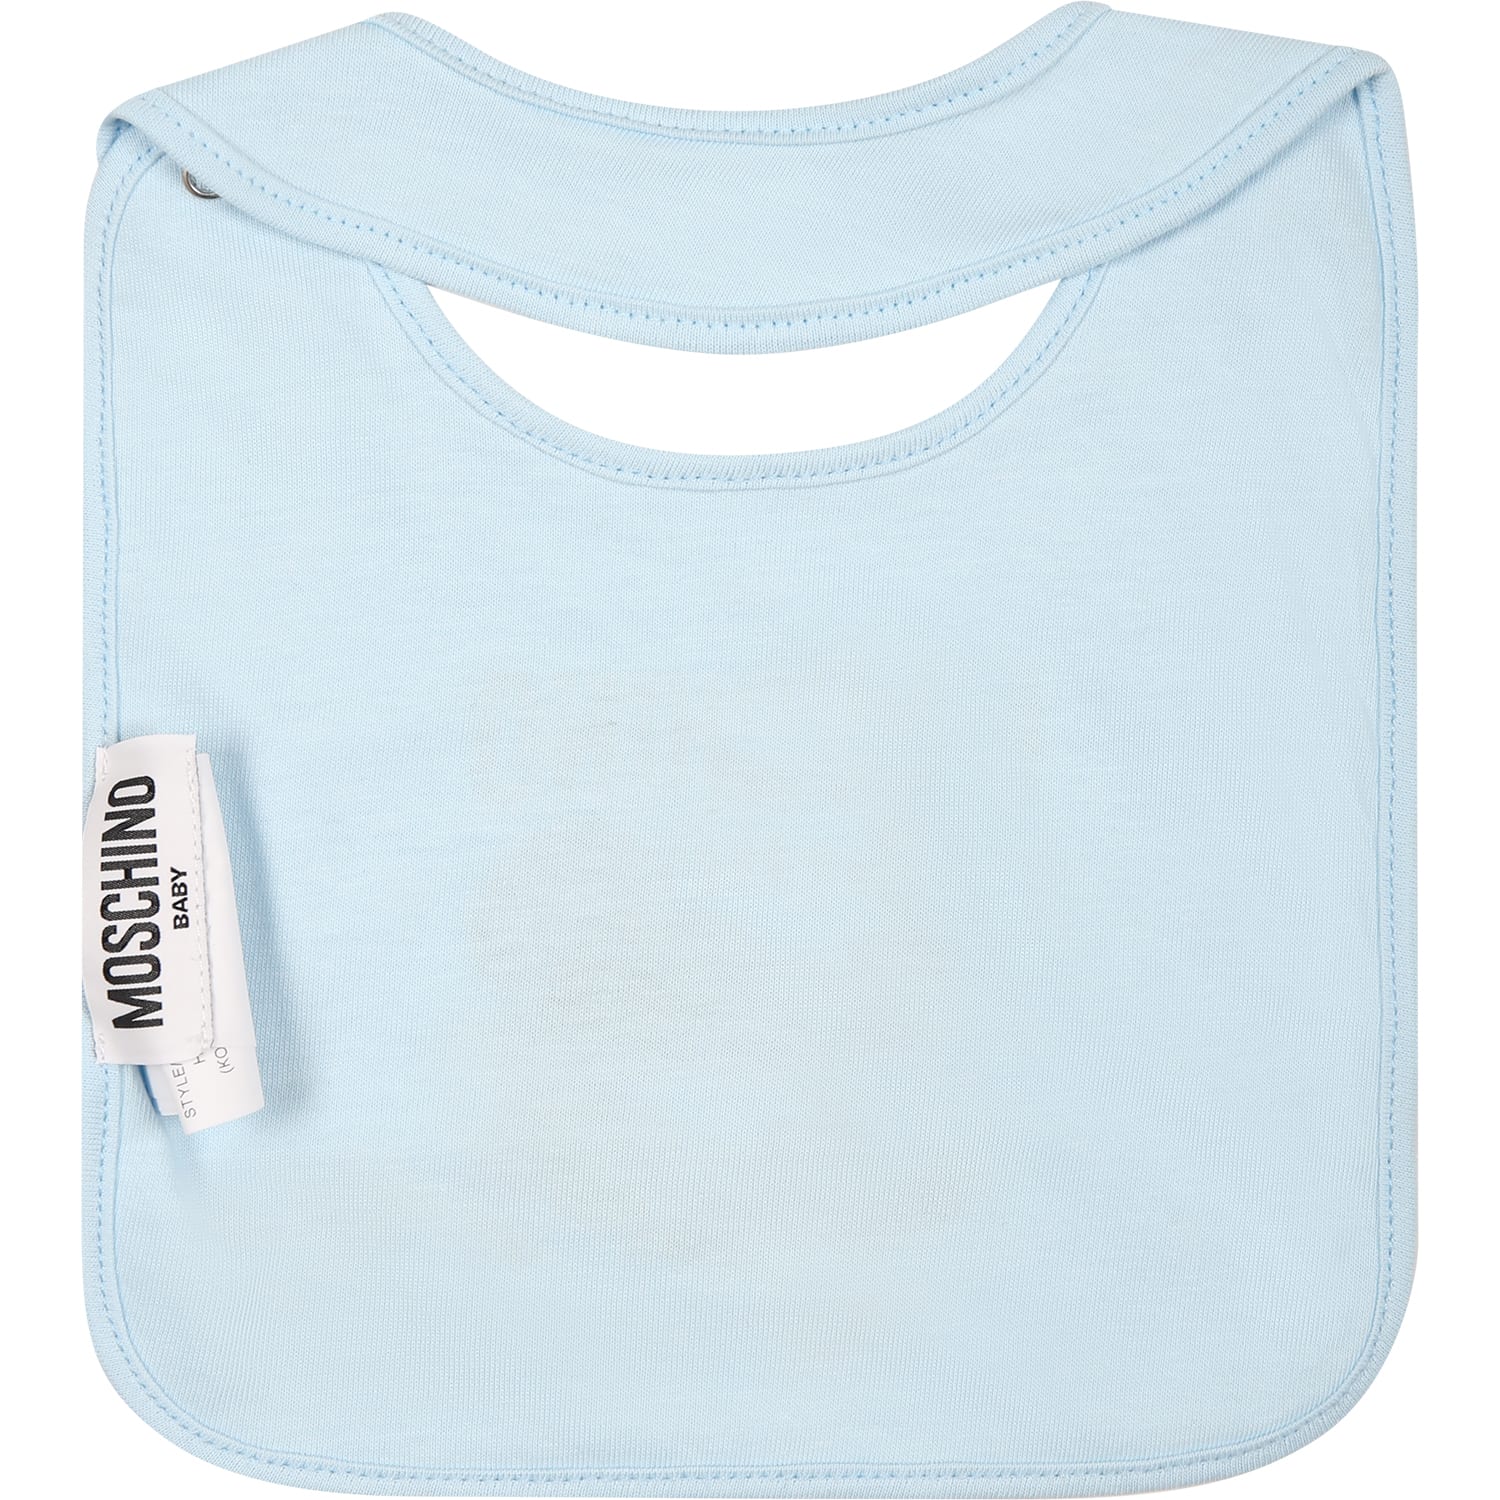 Shop Moschino Light Blue Set For Baby Boy With Teddy Bear